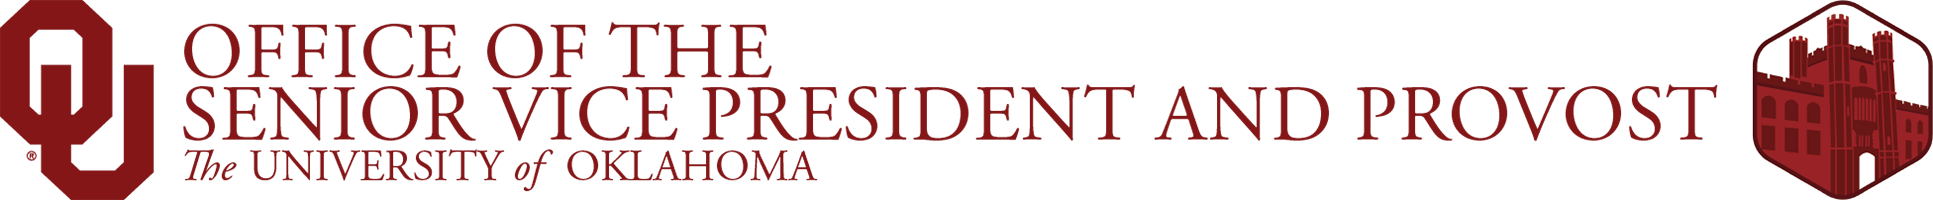 Office of the Senior Vice President and Provost, The University of Oklahoma website wordmark